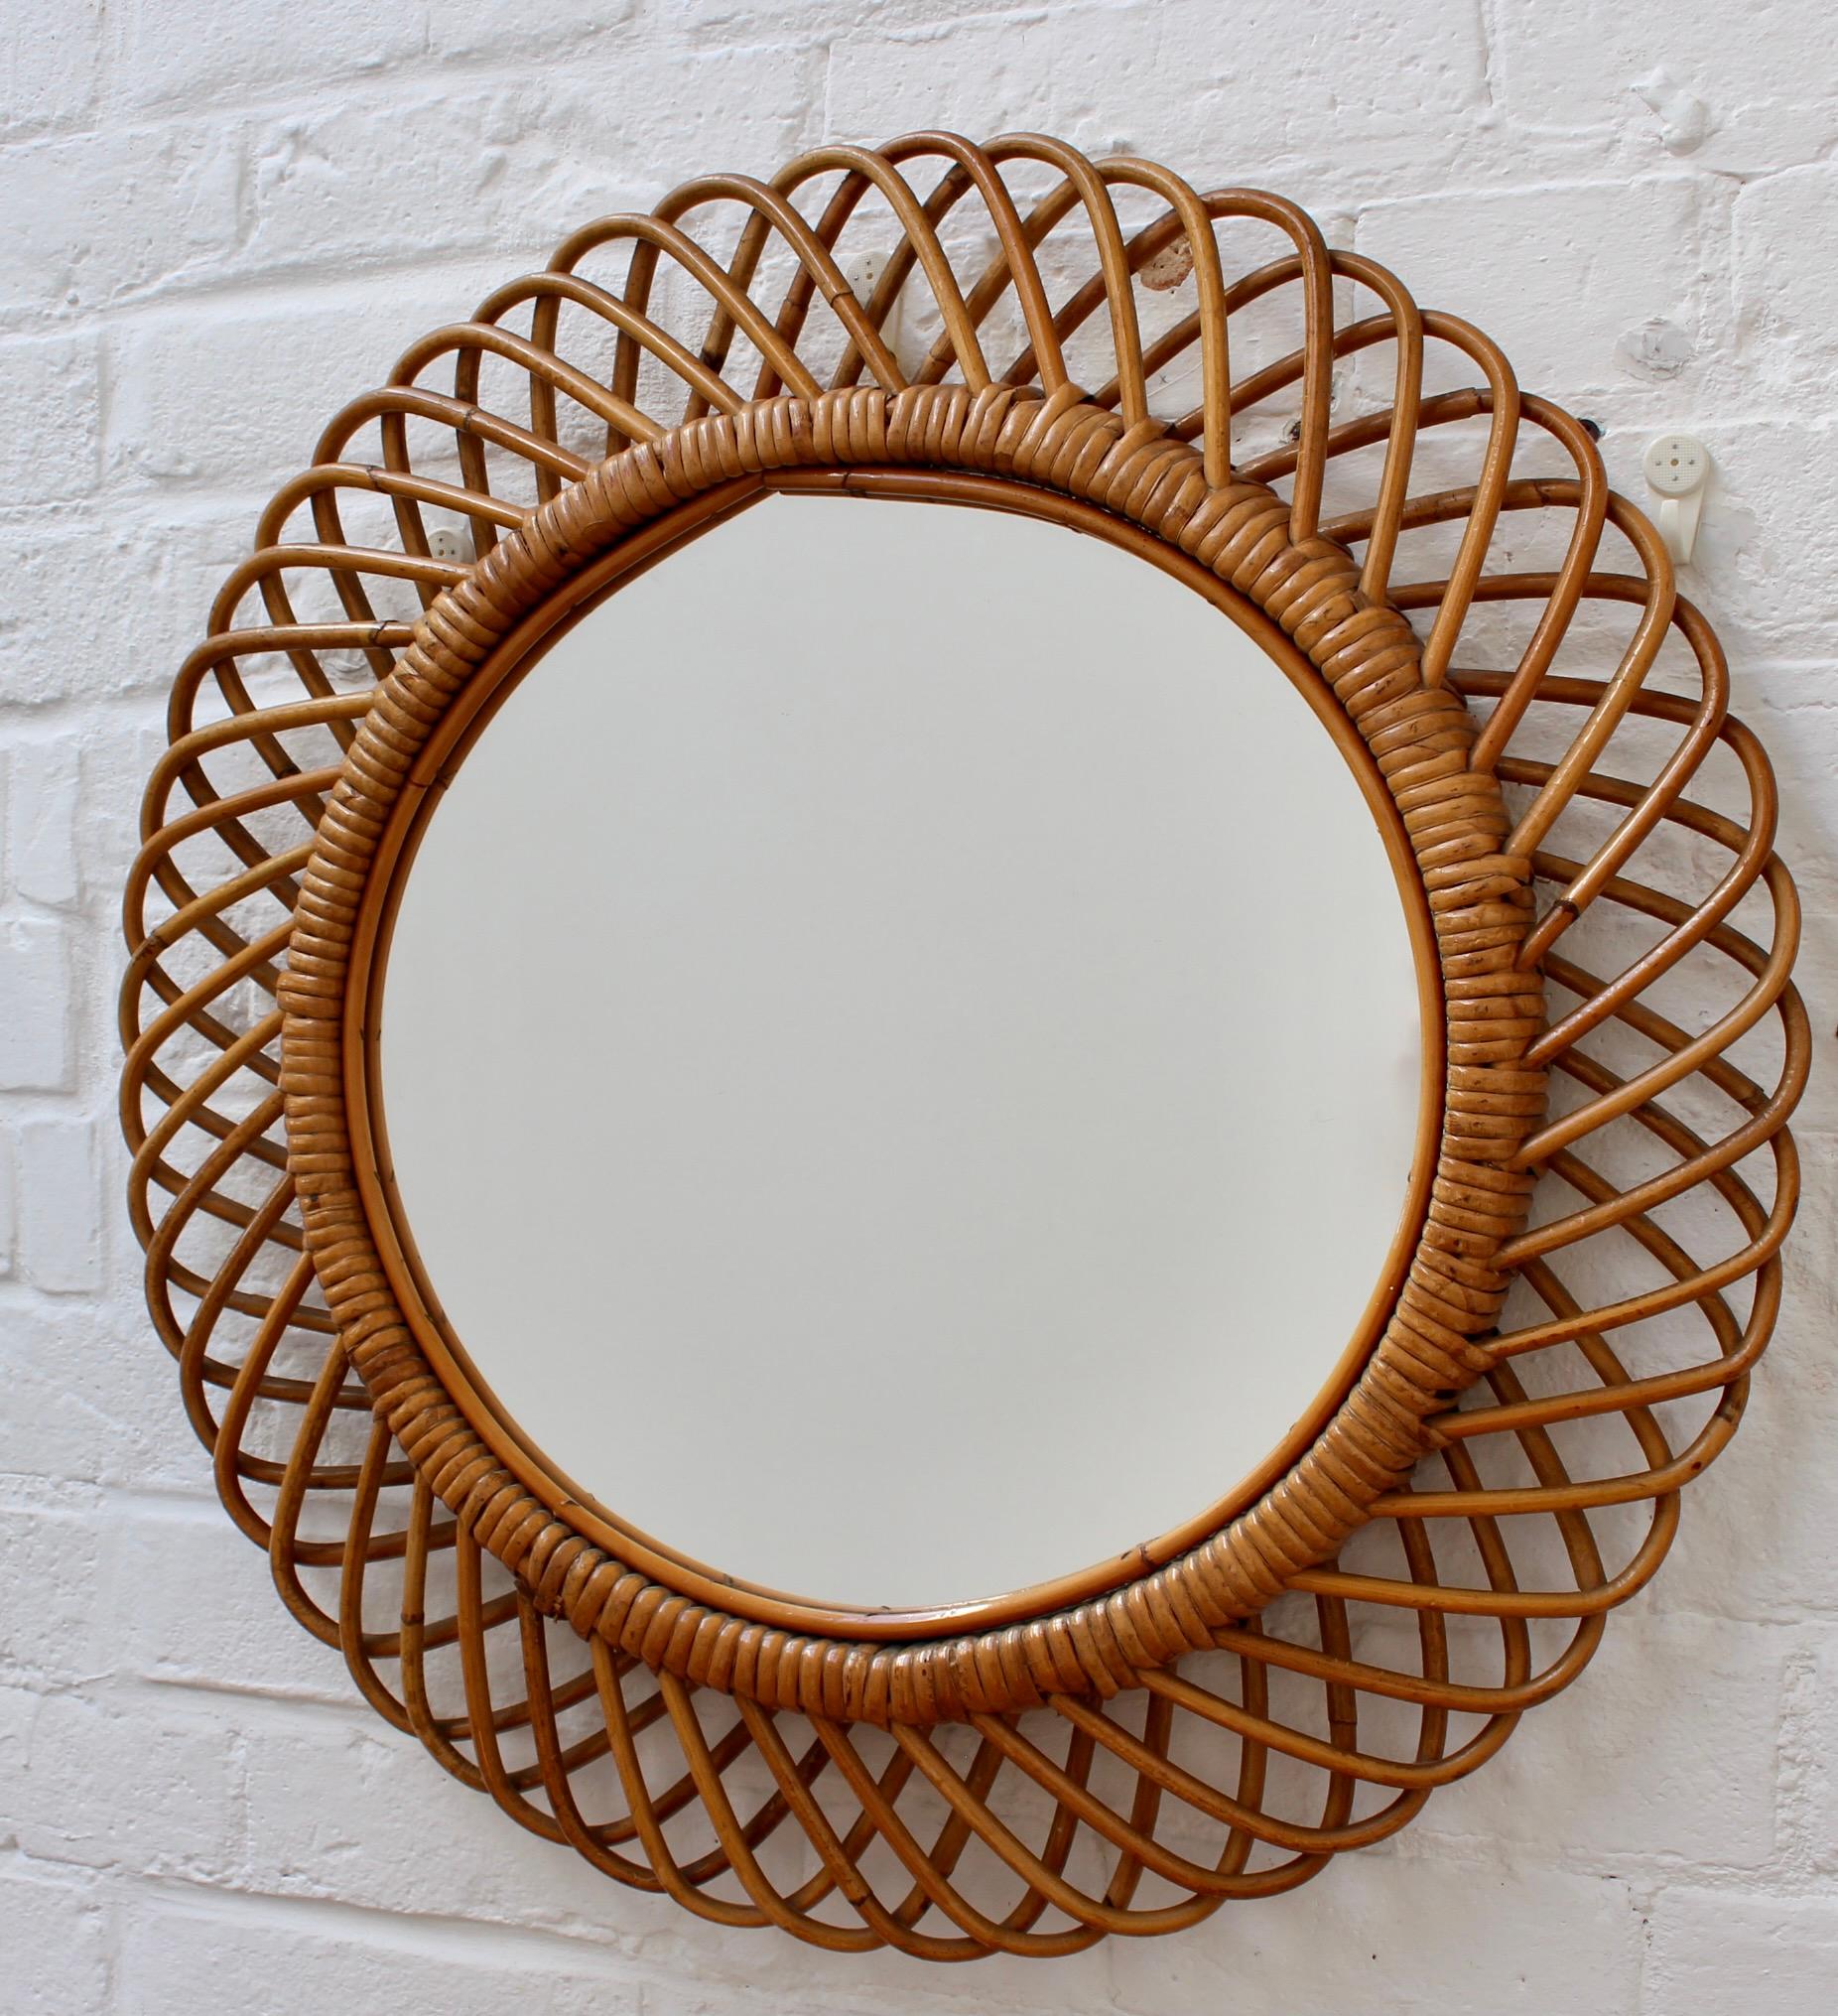 Italian round rattan wall mirror (circa 1960s). A Mid-Century mirror with a very delightful sunburst motif created by a series of rattan horseshoe-shaped 'sunbeams' bound together. There is a characterful, aged patina on the mirror frame. In good